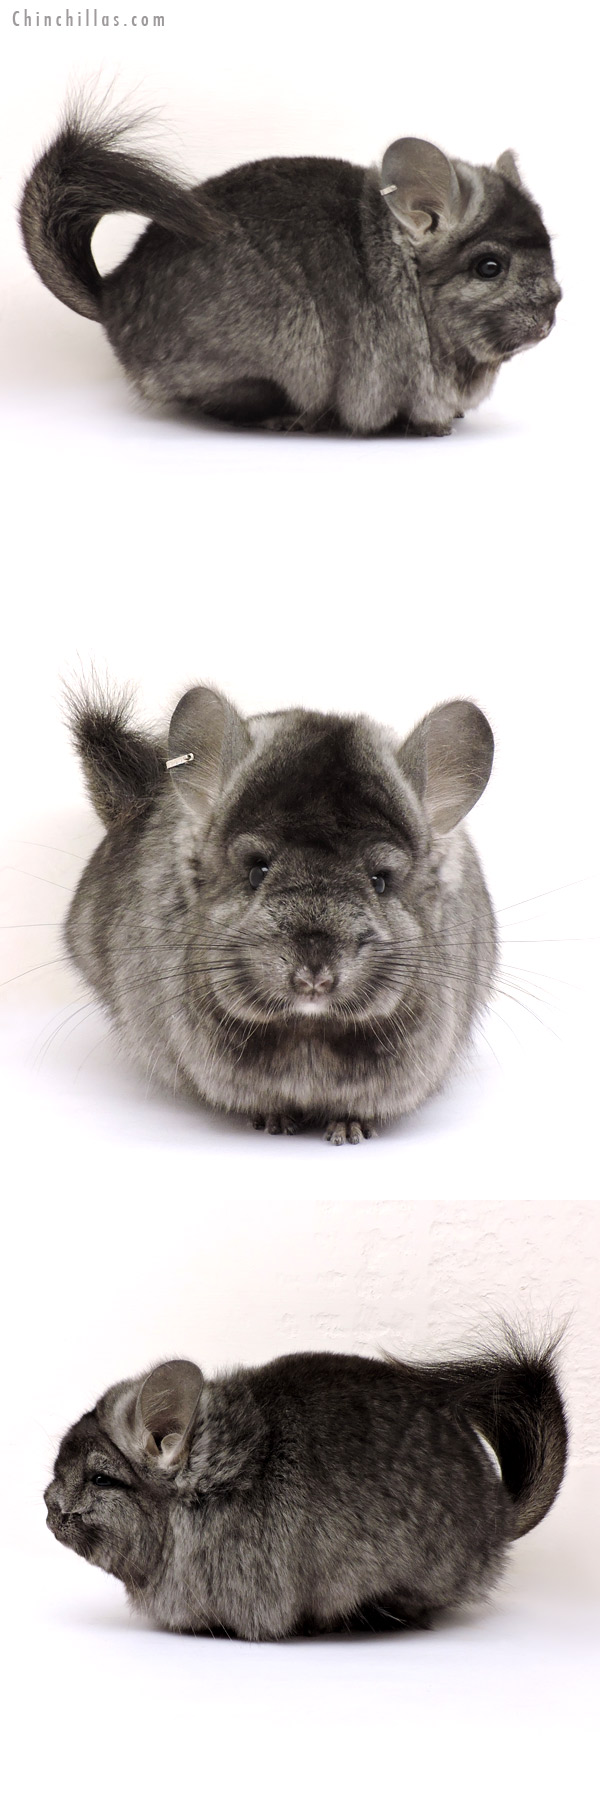 Chinchilla or related item offered for sale or export on Chinchillas.com - 14224 Exceptional Ebony  Royal Persian Angora Female Chinchilla